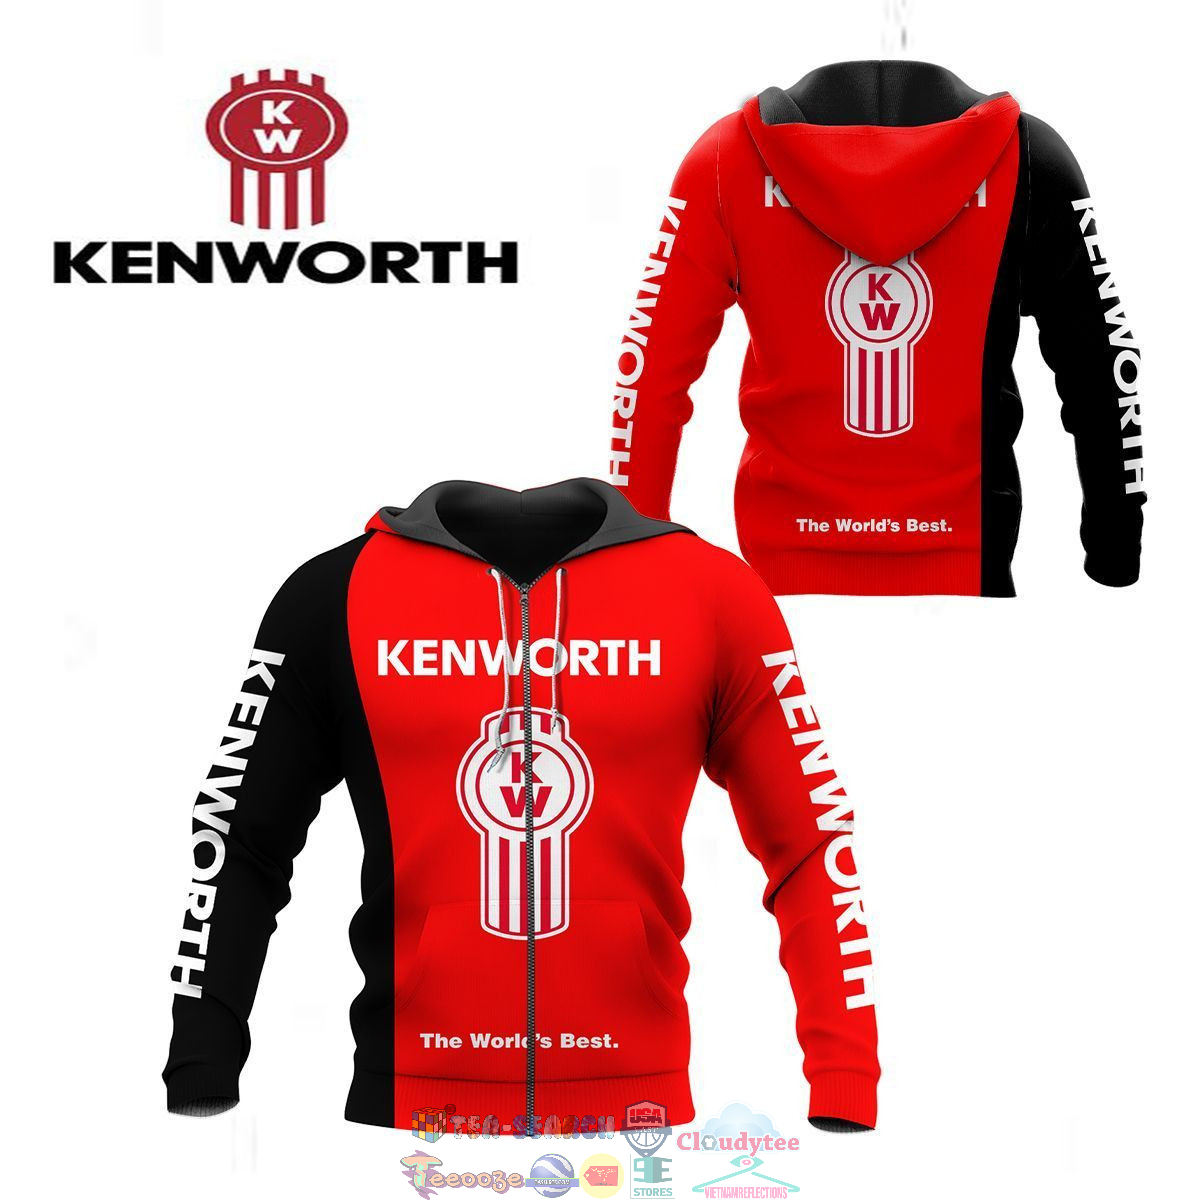 Kenworth ver 4 3D hoodie and t-shirt